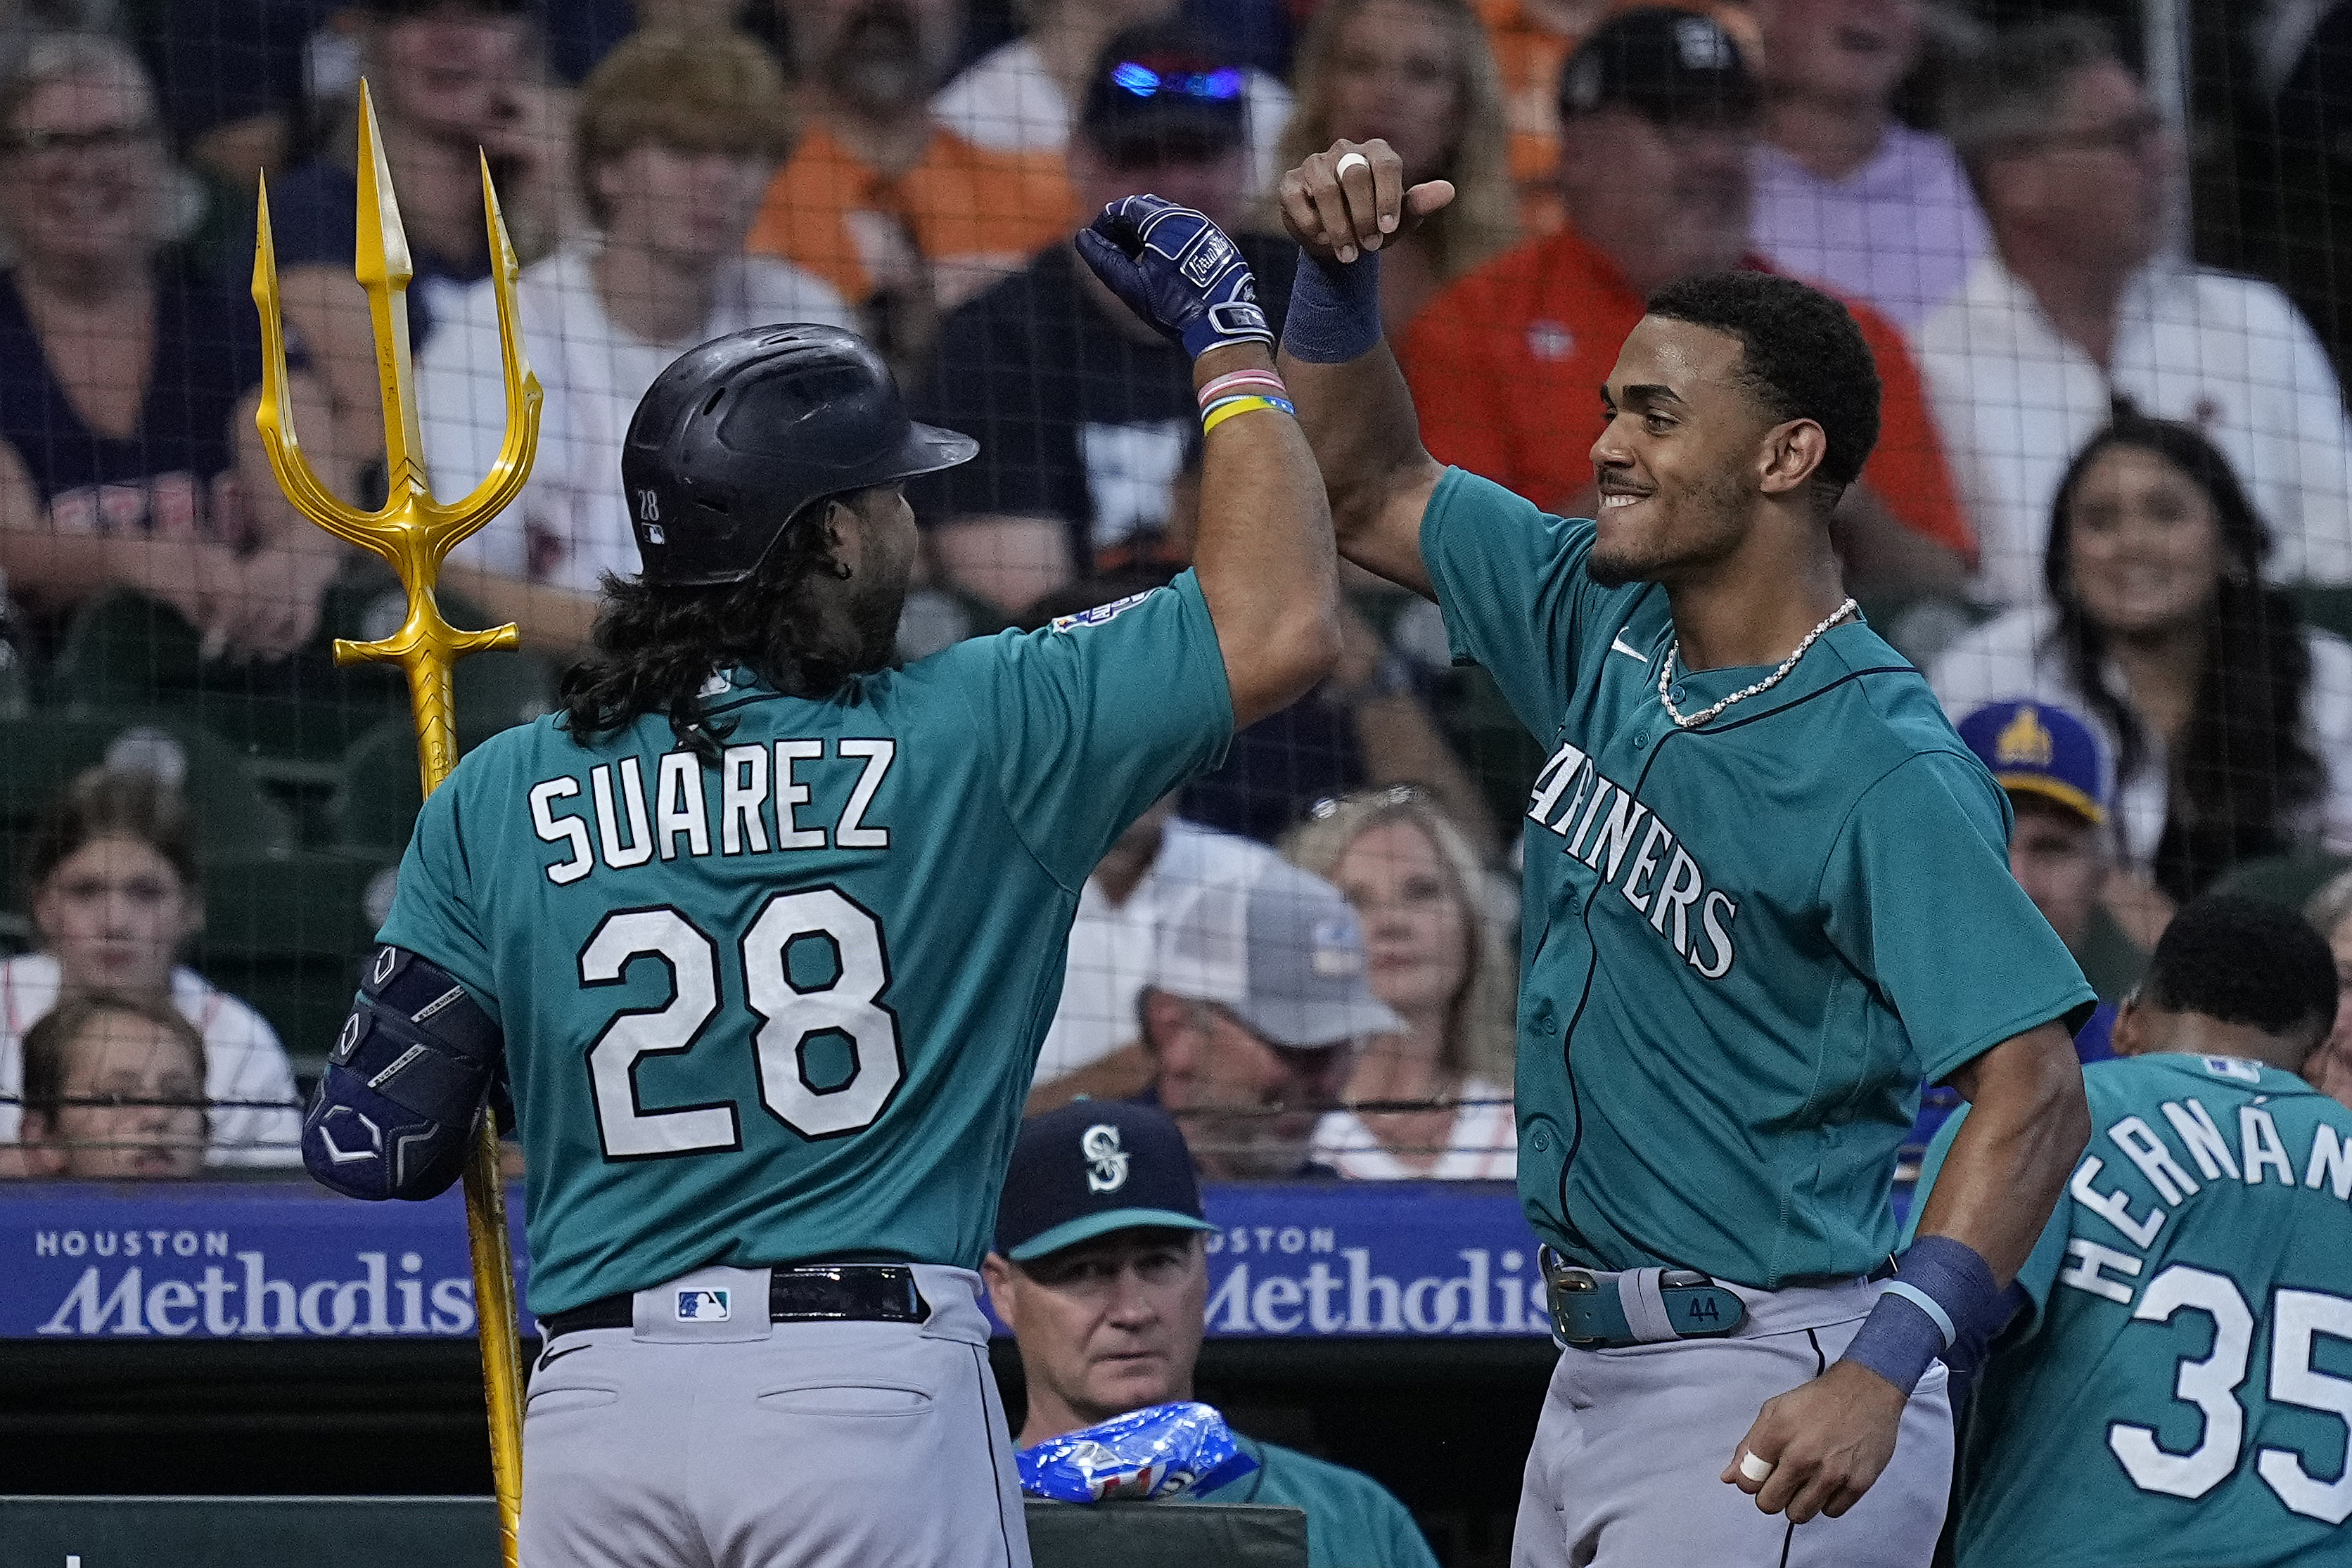 Eugenio Suarez redeems earlier mistake with big home run as Mariners open  series in Texas with win, Mariners